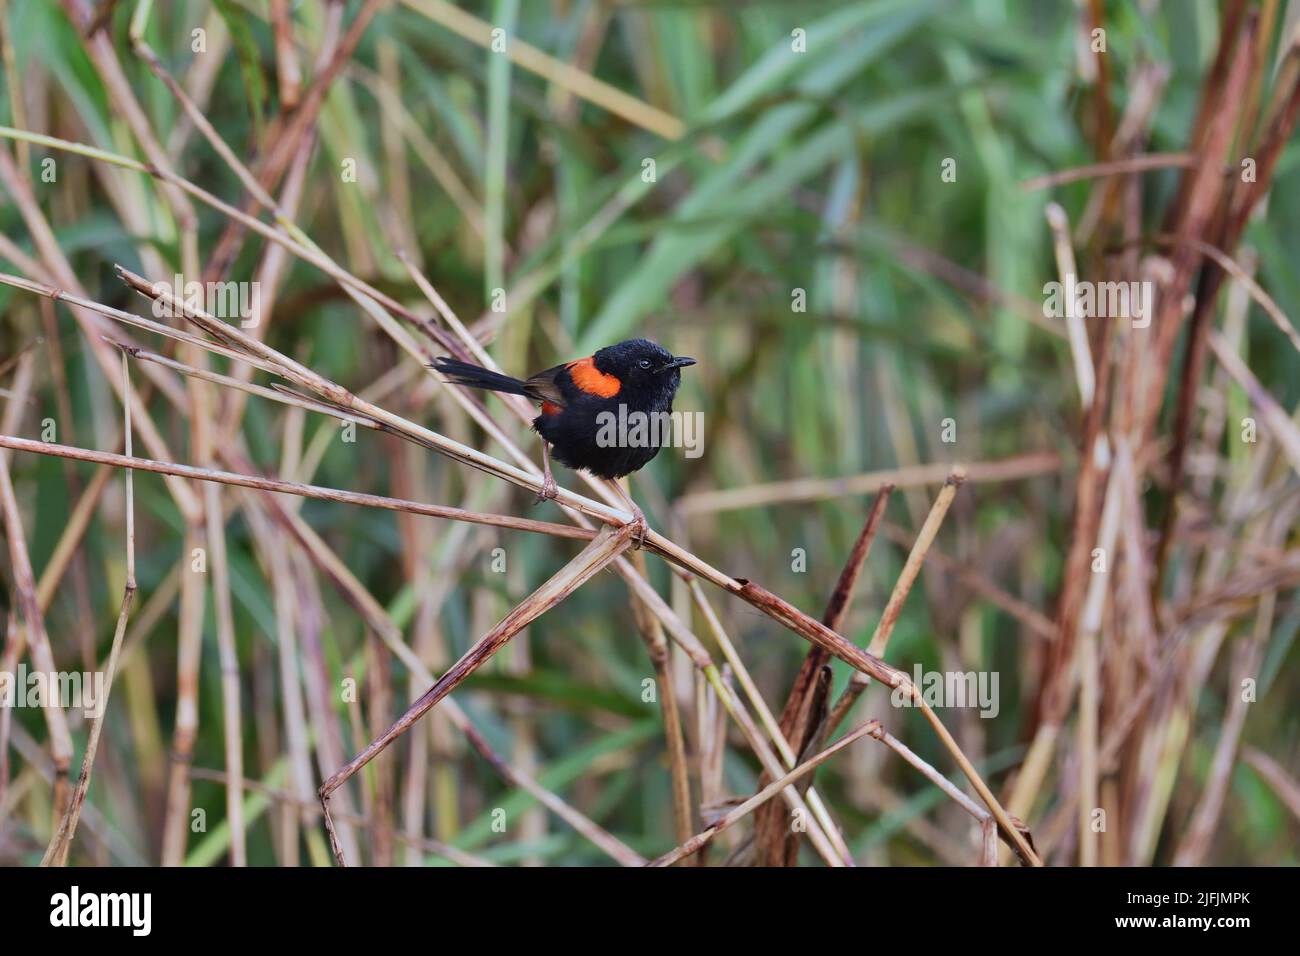 An Australian Male Red-backed Fairy-wren -Malurus melanocephalus- bird perched on a thick, tall, dry grass stem looking for food Stock Photo